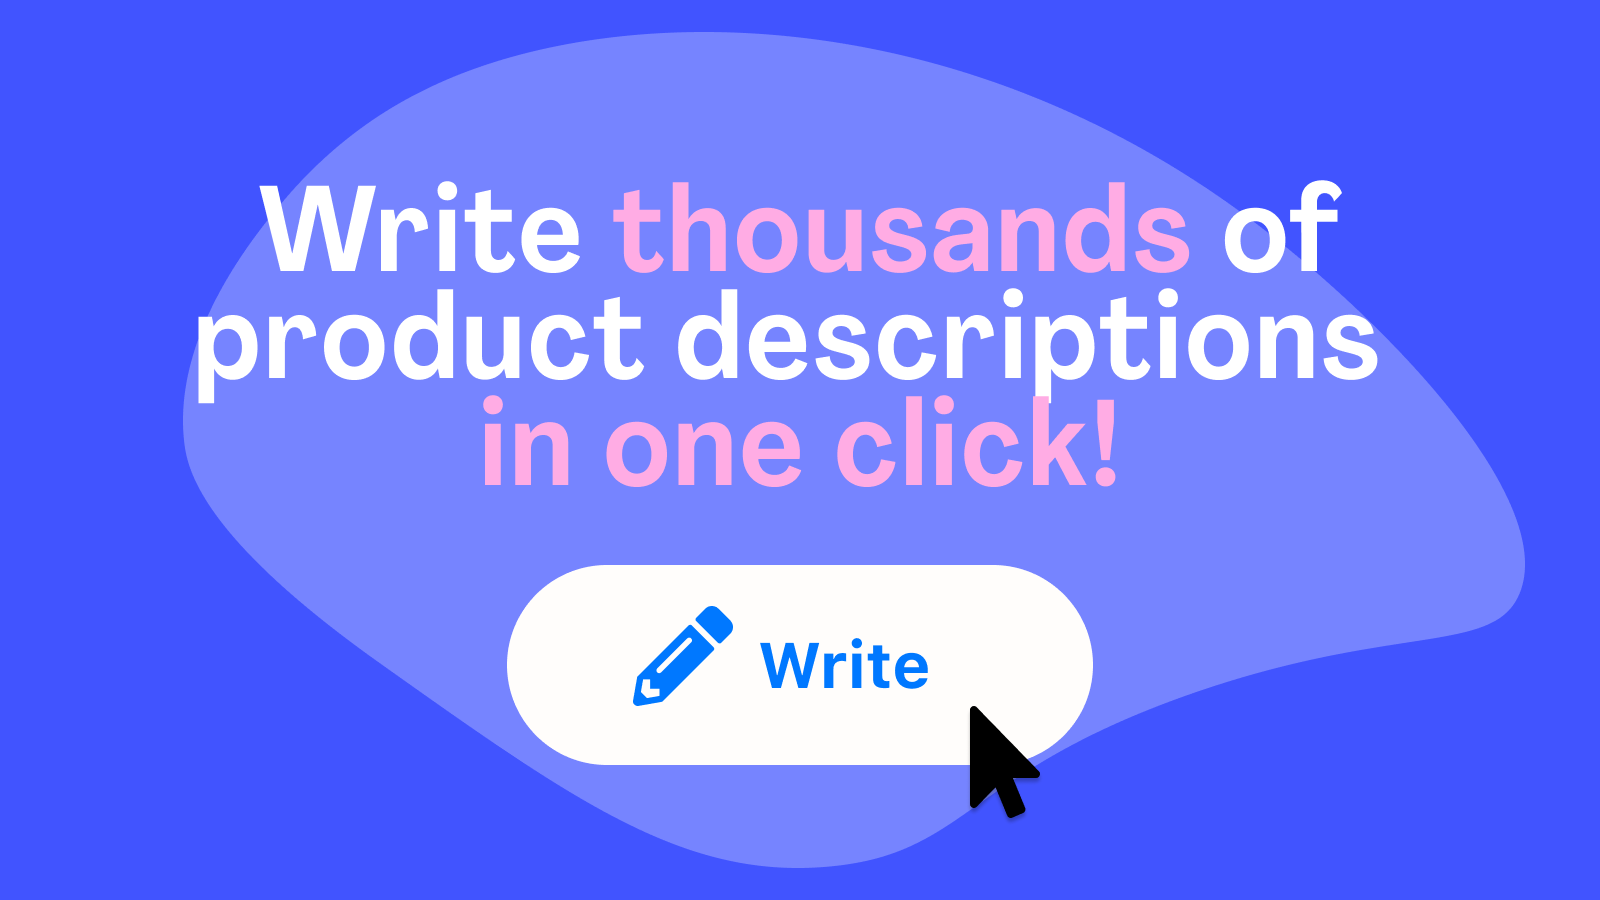 Generate up to 10,000 Product Descriptions in one click